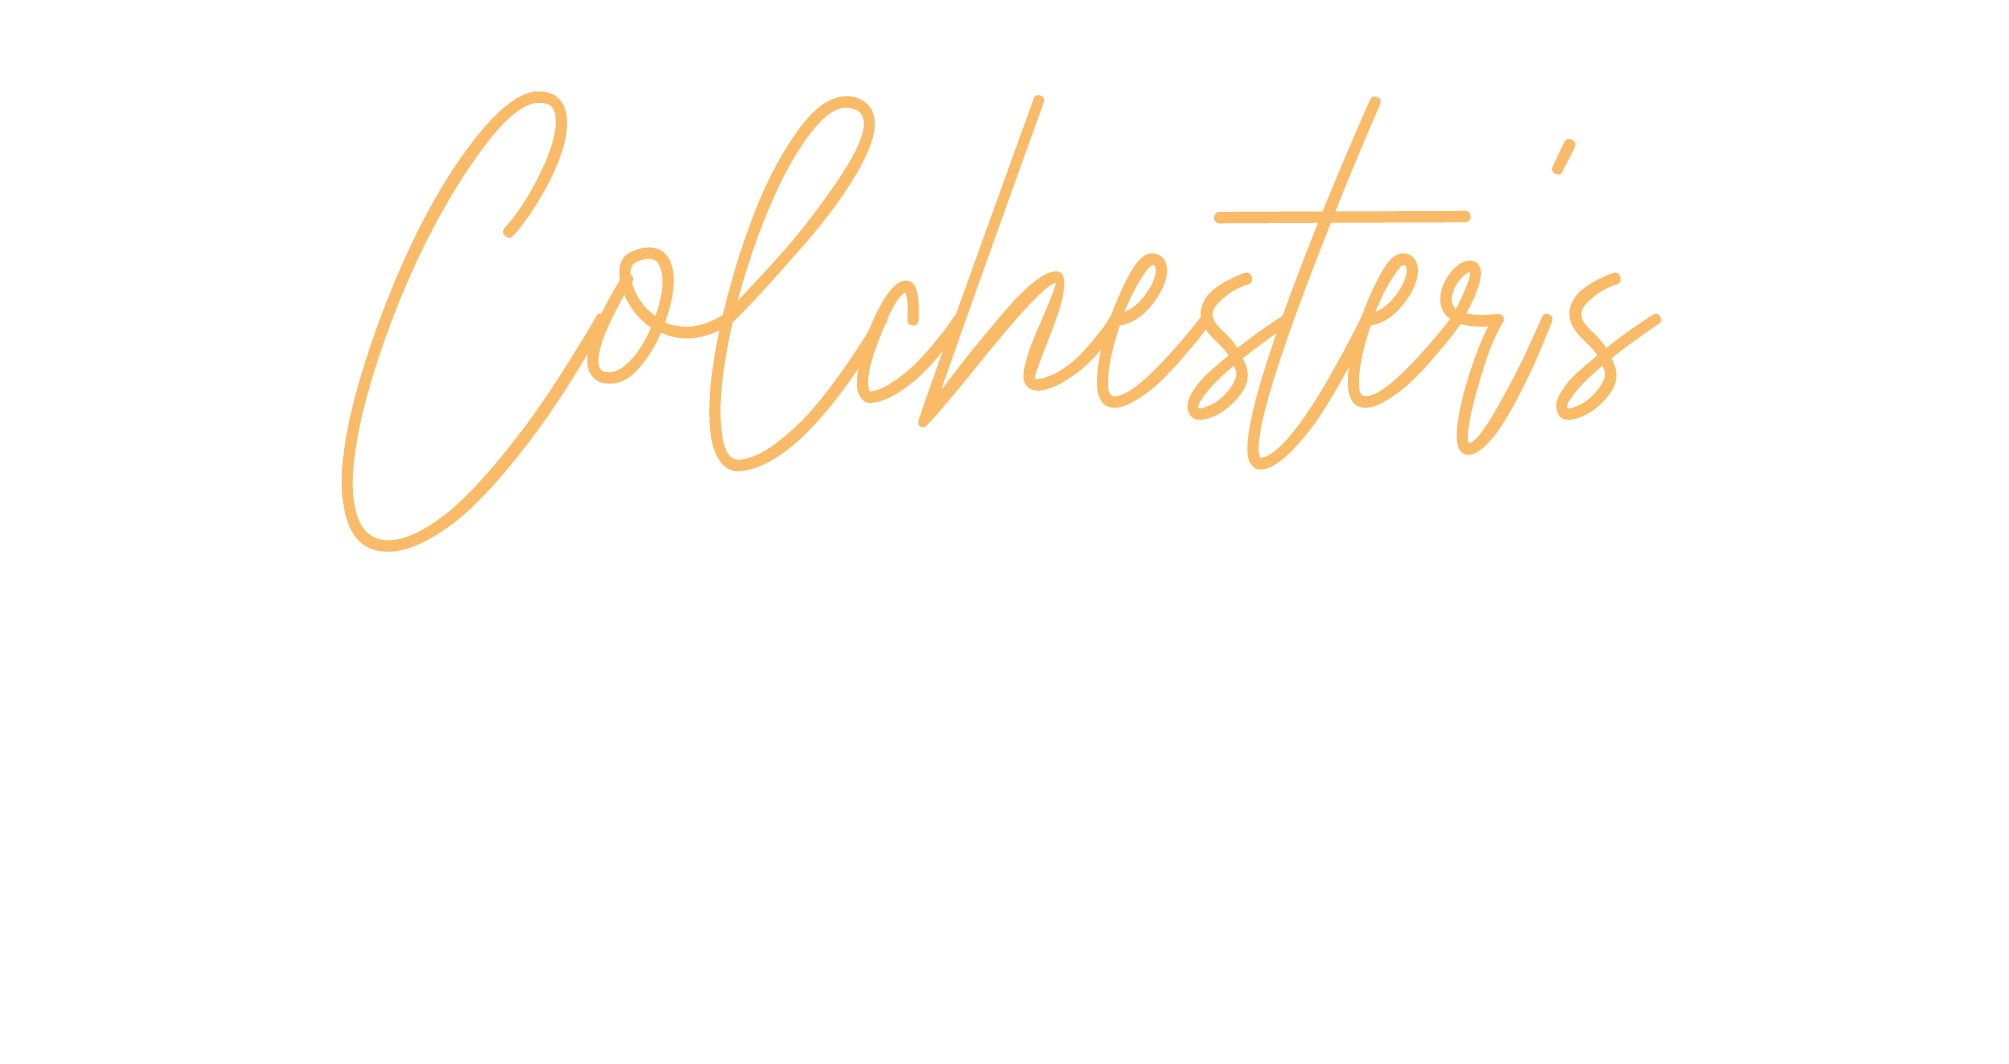 Colchester's Leading Independent Recruitment Agency